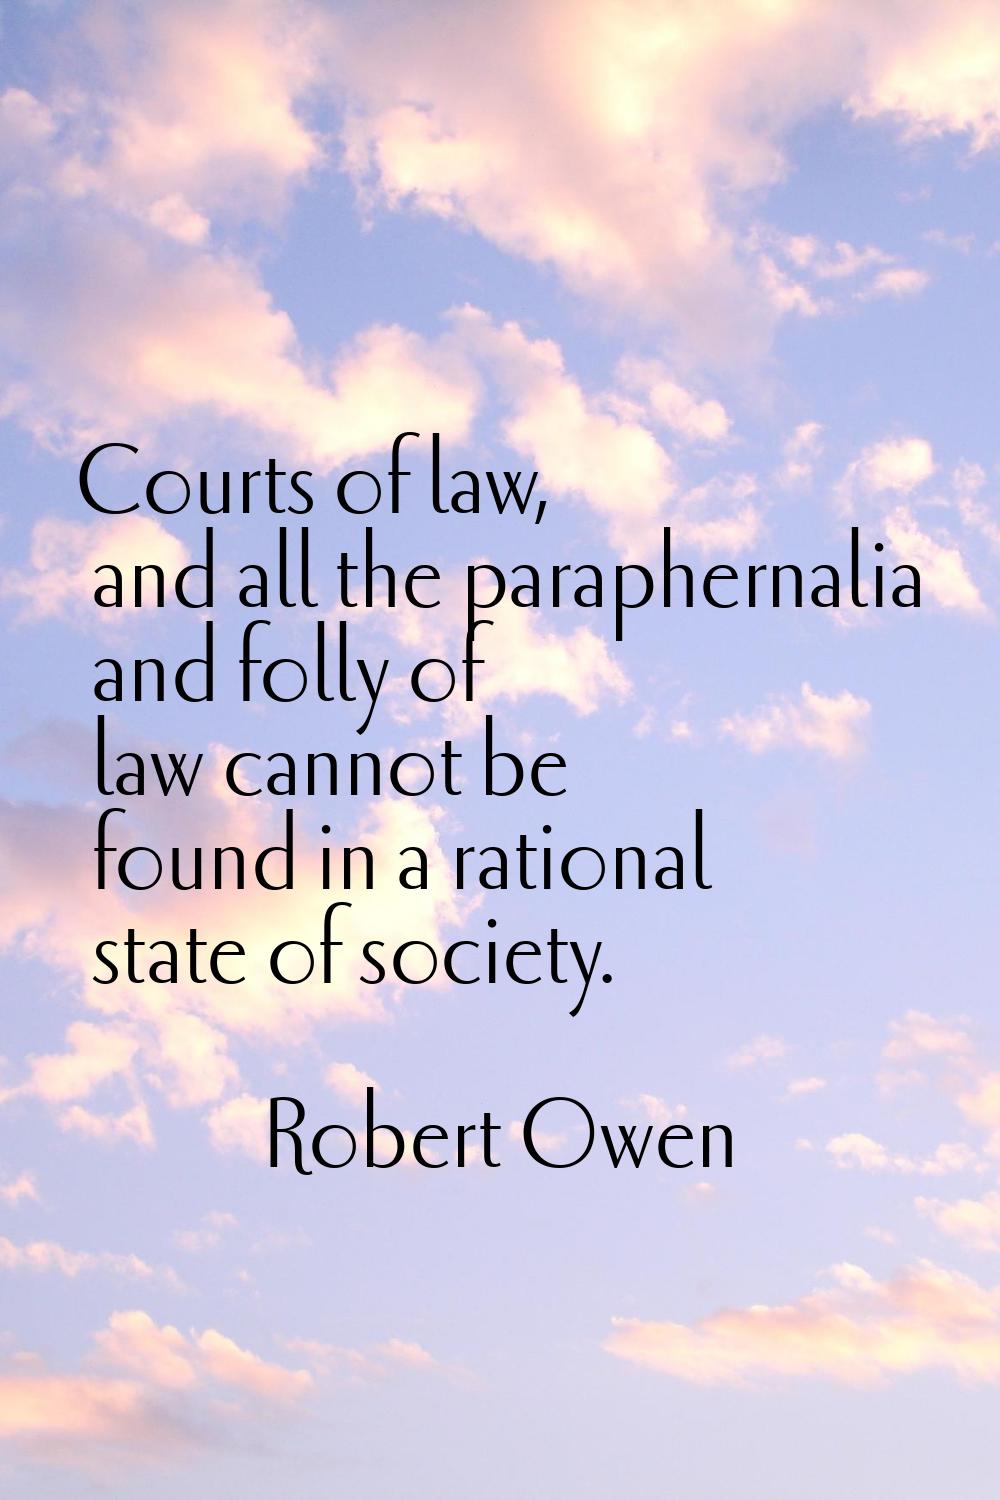 Courts of law, and all the paraphernalia and folly of law cannot be found in a rational state of so